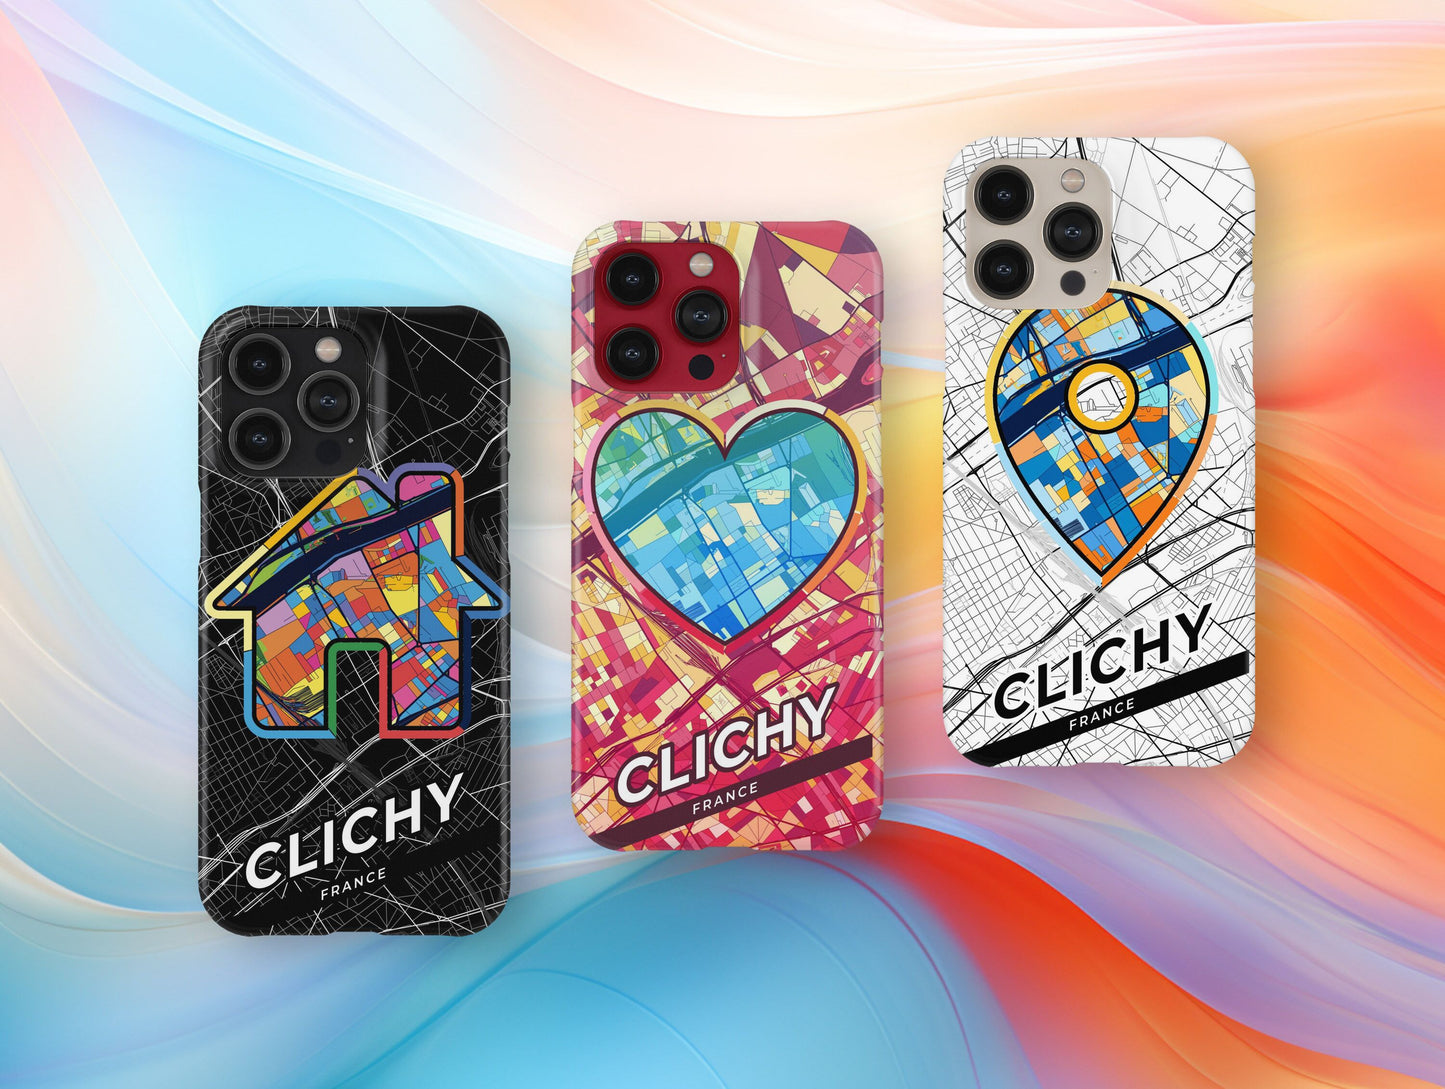 Clichy France slim phone case with colorful icon. Birthday, wedding or housewarming gift. Couple match cases.